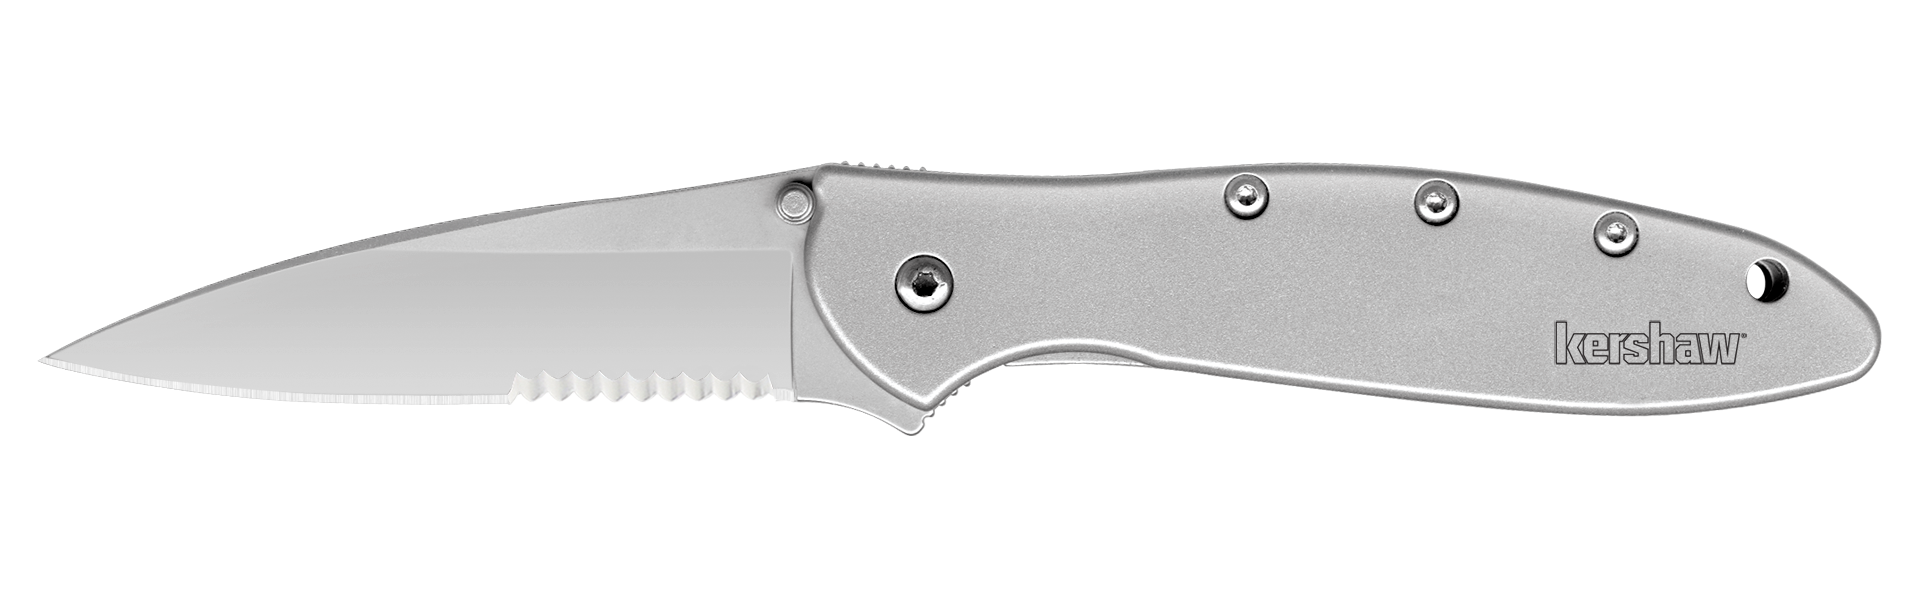 Kershaw Leek - Assisted Opening - Stainless Handle - Stainless Finish - 1660ST